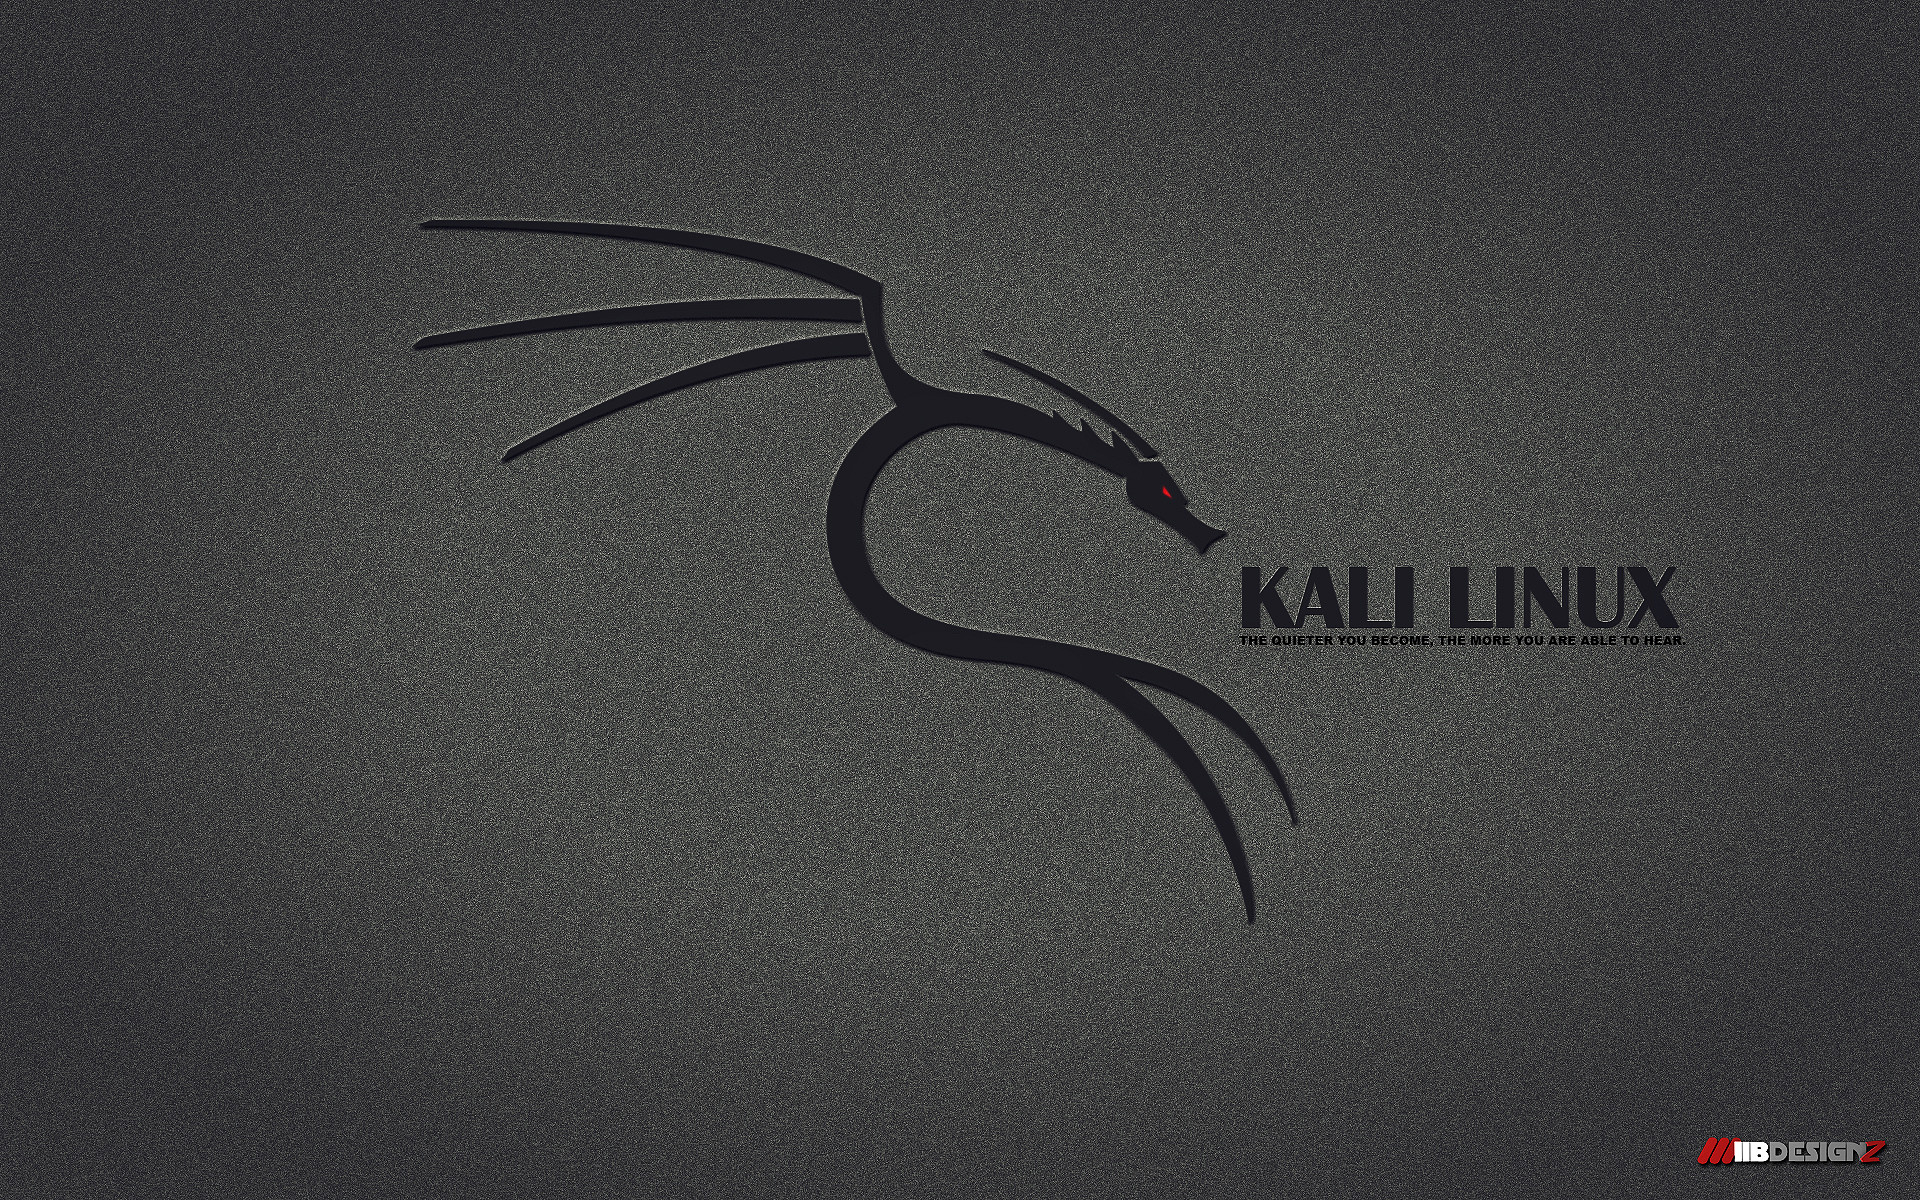 1920x1200  Kali Linux. How to set wallpaper on your desktop? Click the  download link from above and set the wallpaper on the desktop from your OS.